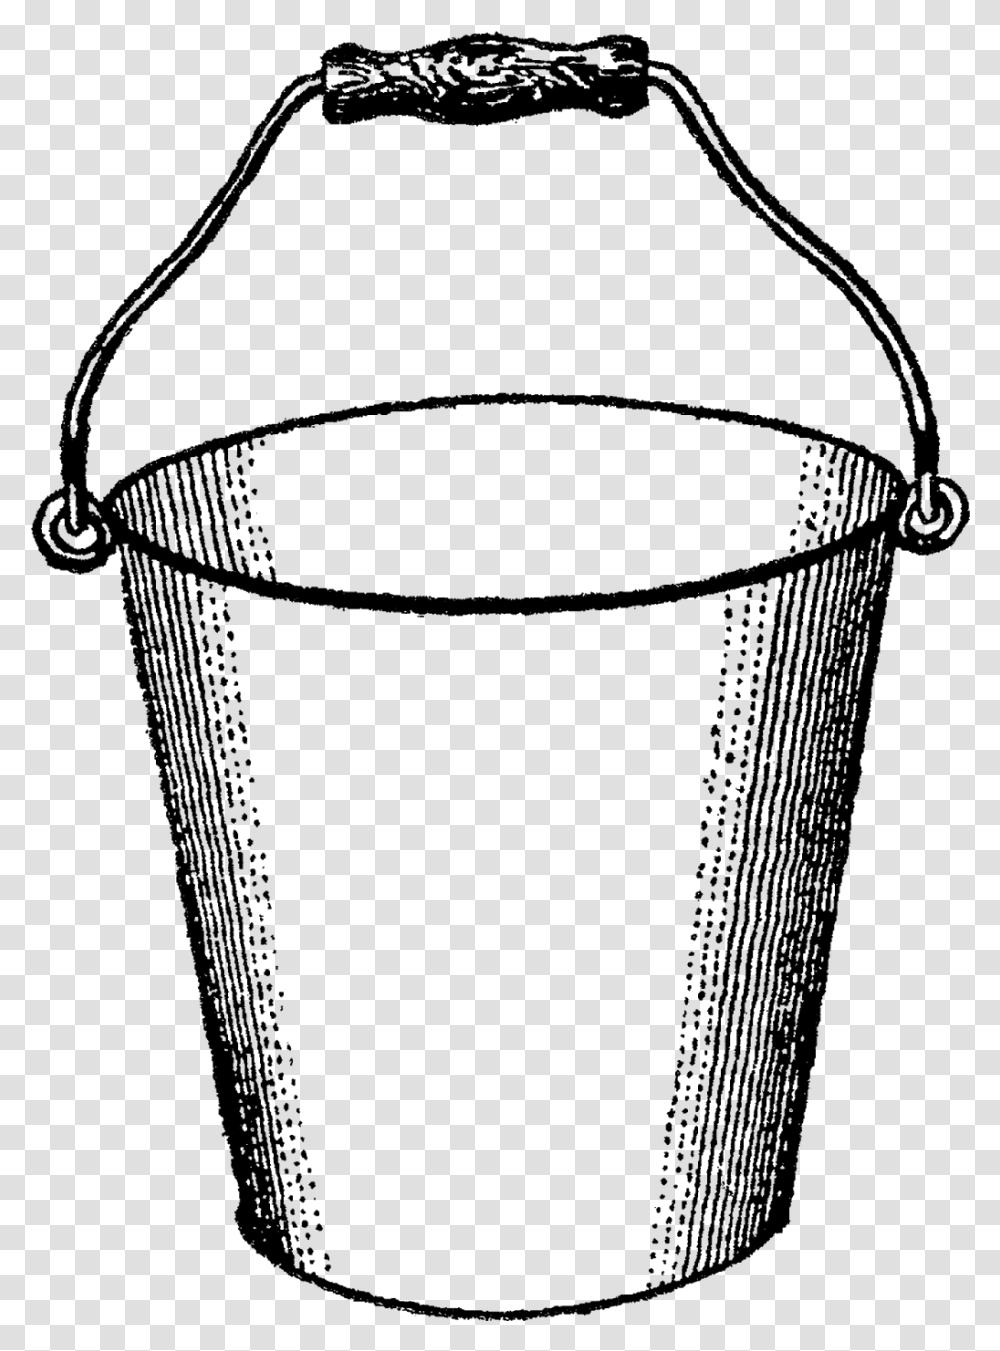 Bucket No Background Mop Bucket Mop Clip Art Black And White, Glass, Beverage, Drink, Alcohol Transparent Png